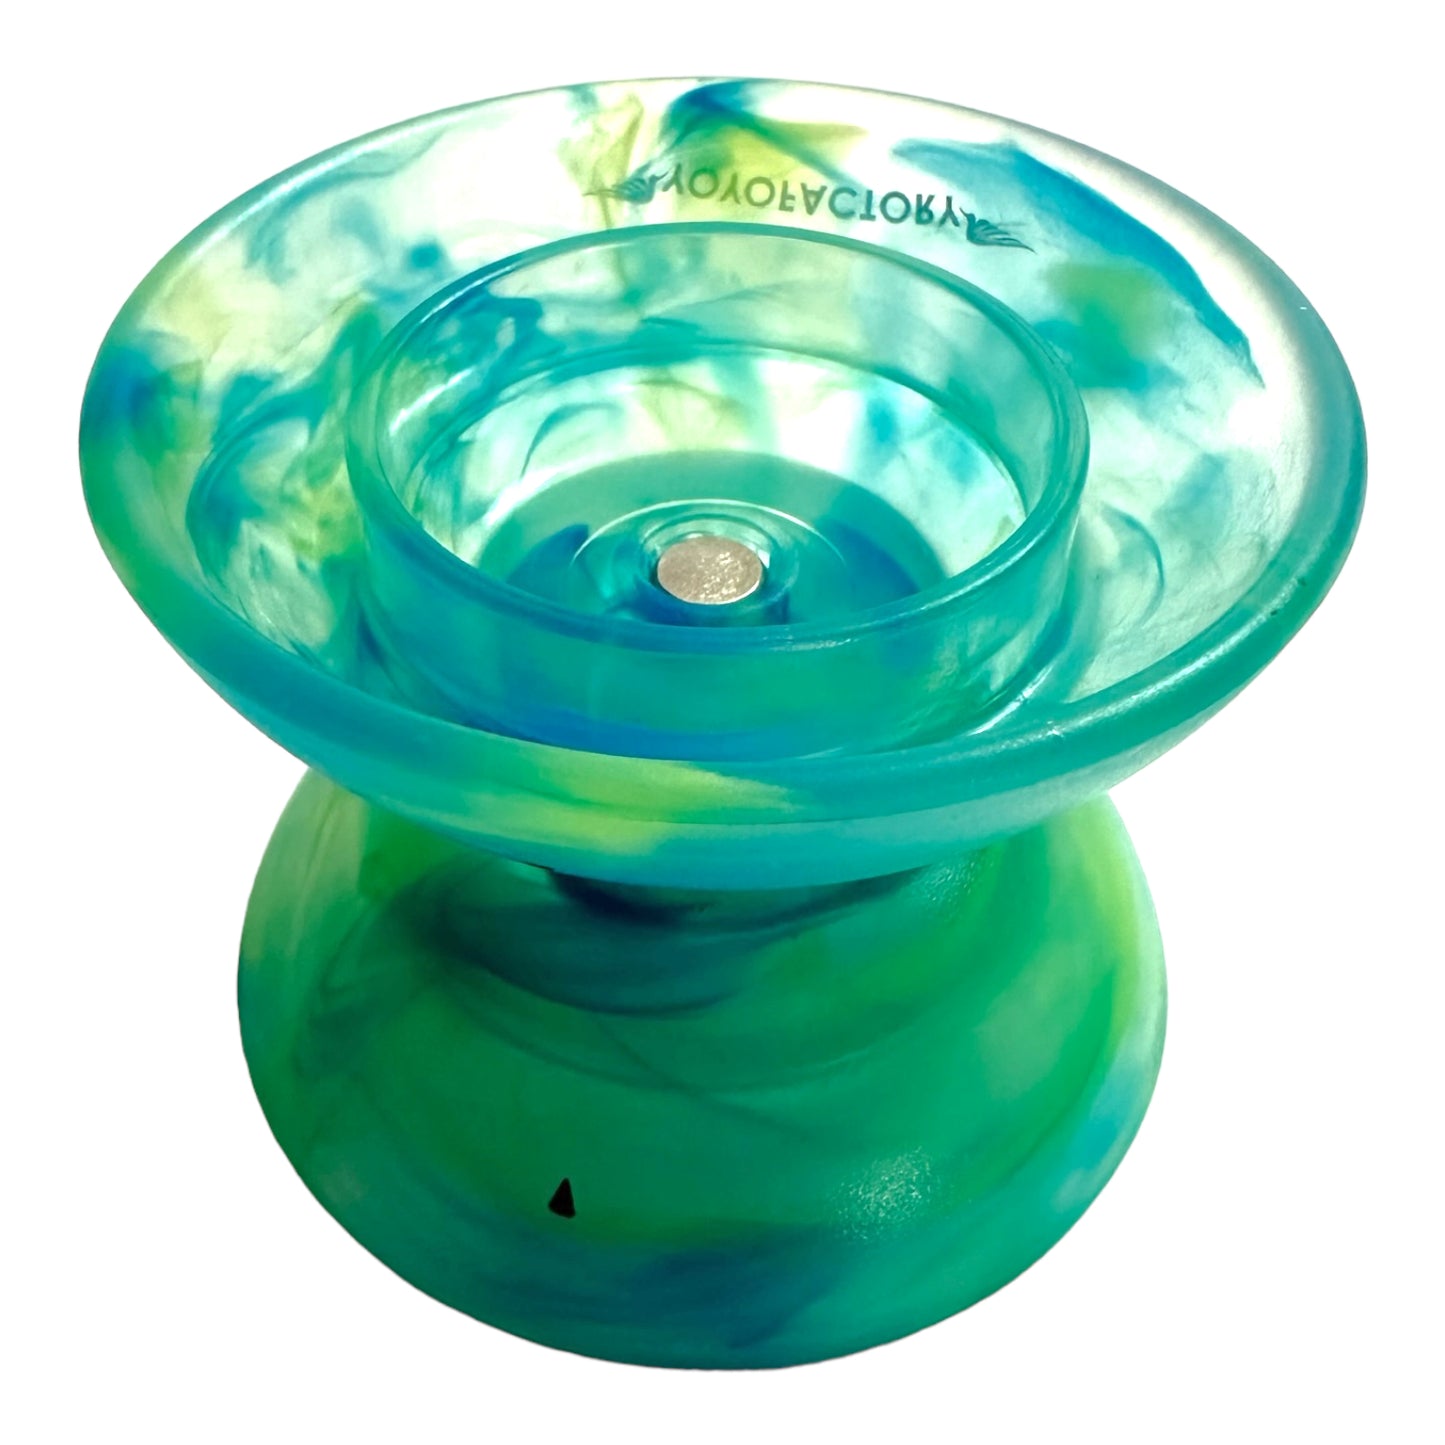 Flight Off-string YoYo a-may-zing prices!